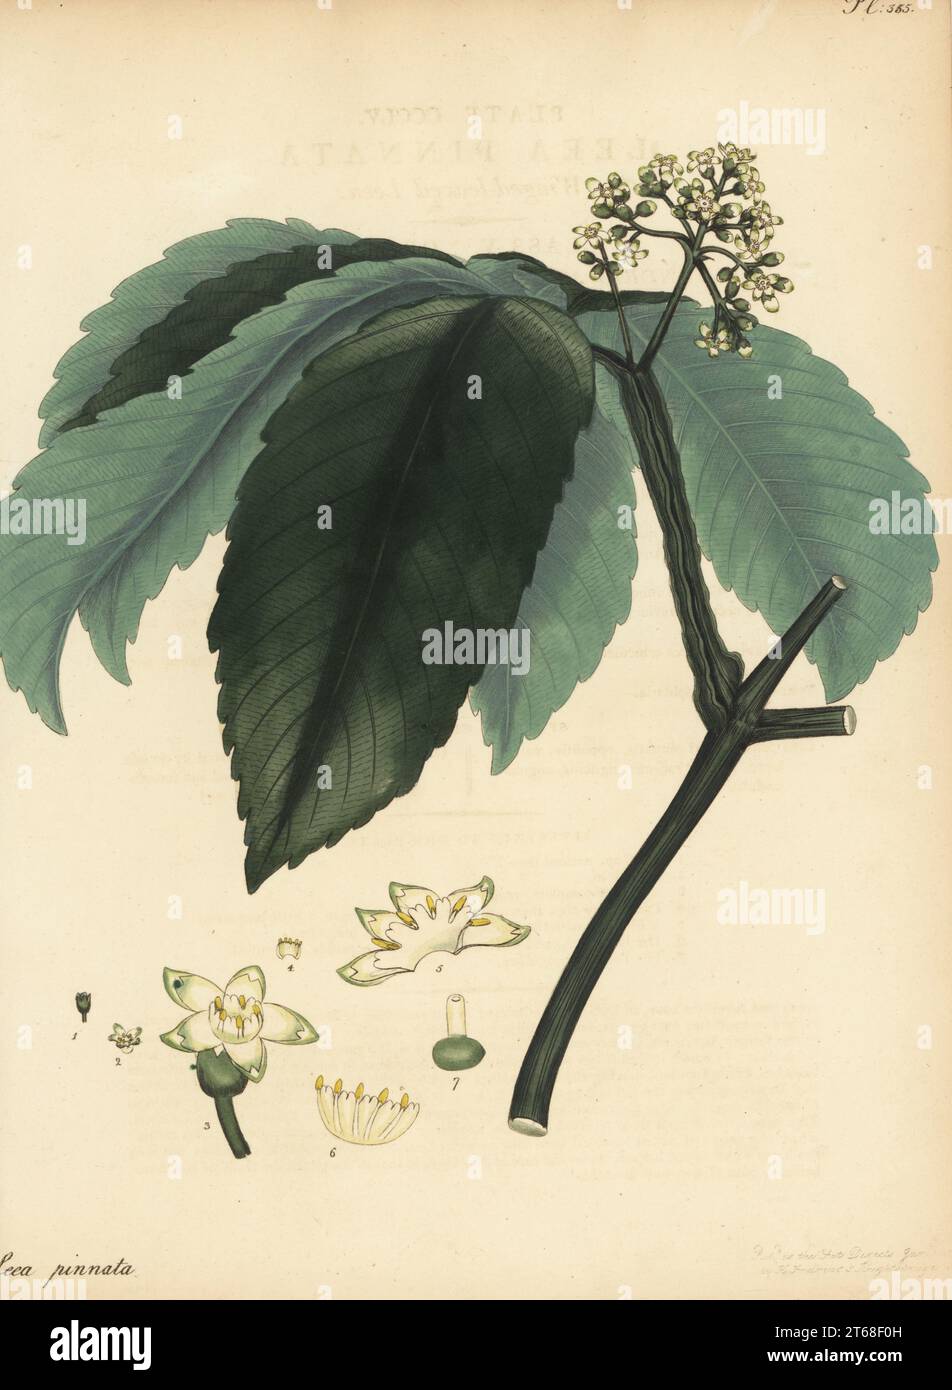 Leea asiatica. Winged-leaved leea, Leea pinnata. From the East Indies, from India to China. Copperplate engraving drawn, engraved and hand-coloured by Henry Andrews from his Botanical Register, Volume 5, self-published in Knightsbridge, London, 1804. Stock Photo